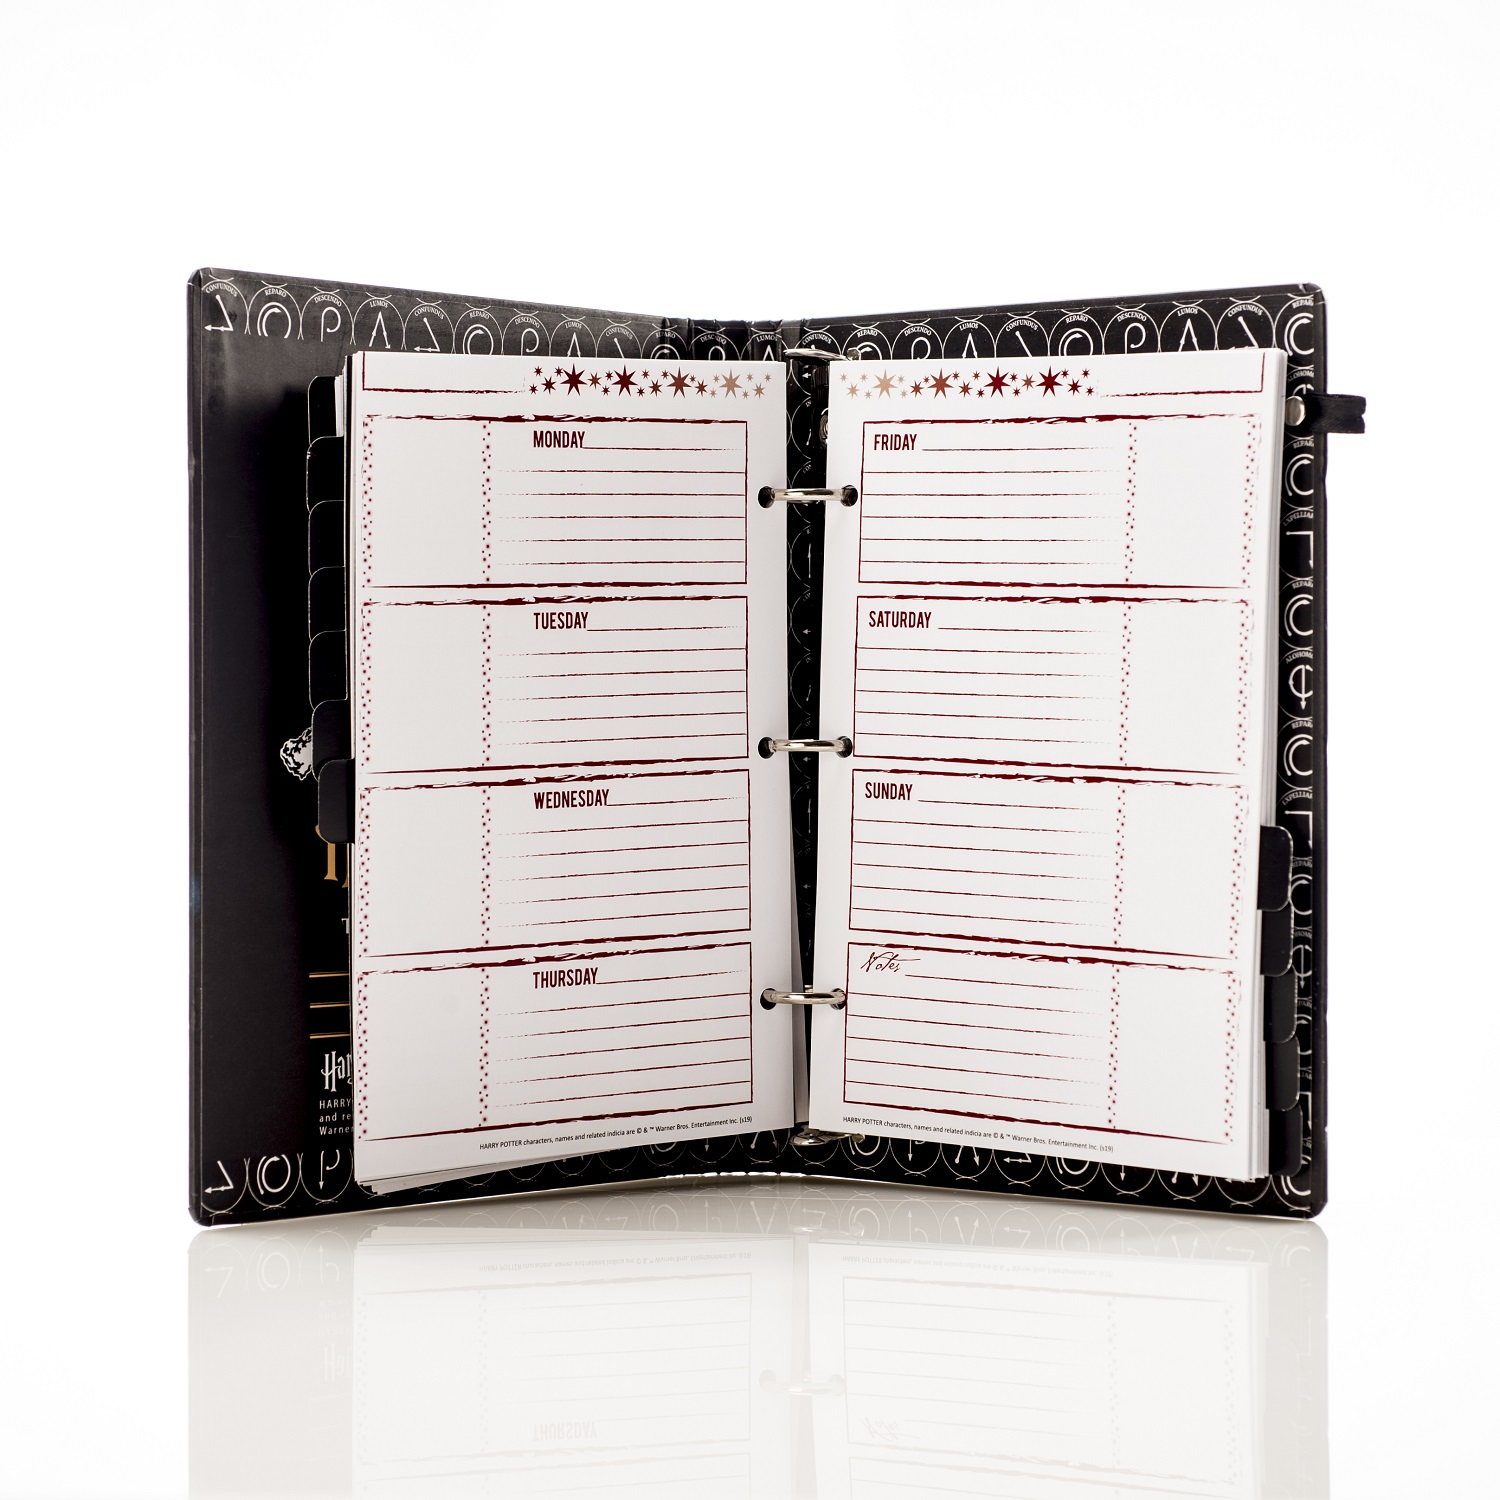 ConQuest Journals Celestial Planner weekly pages